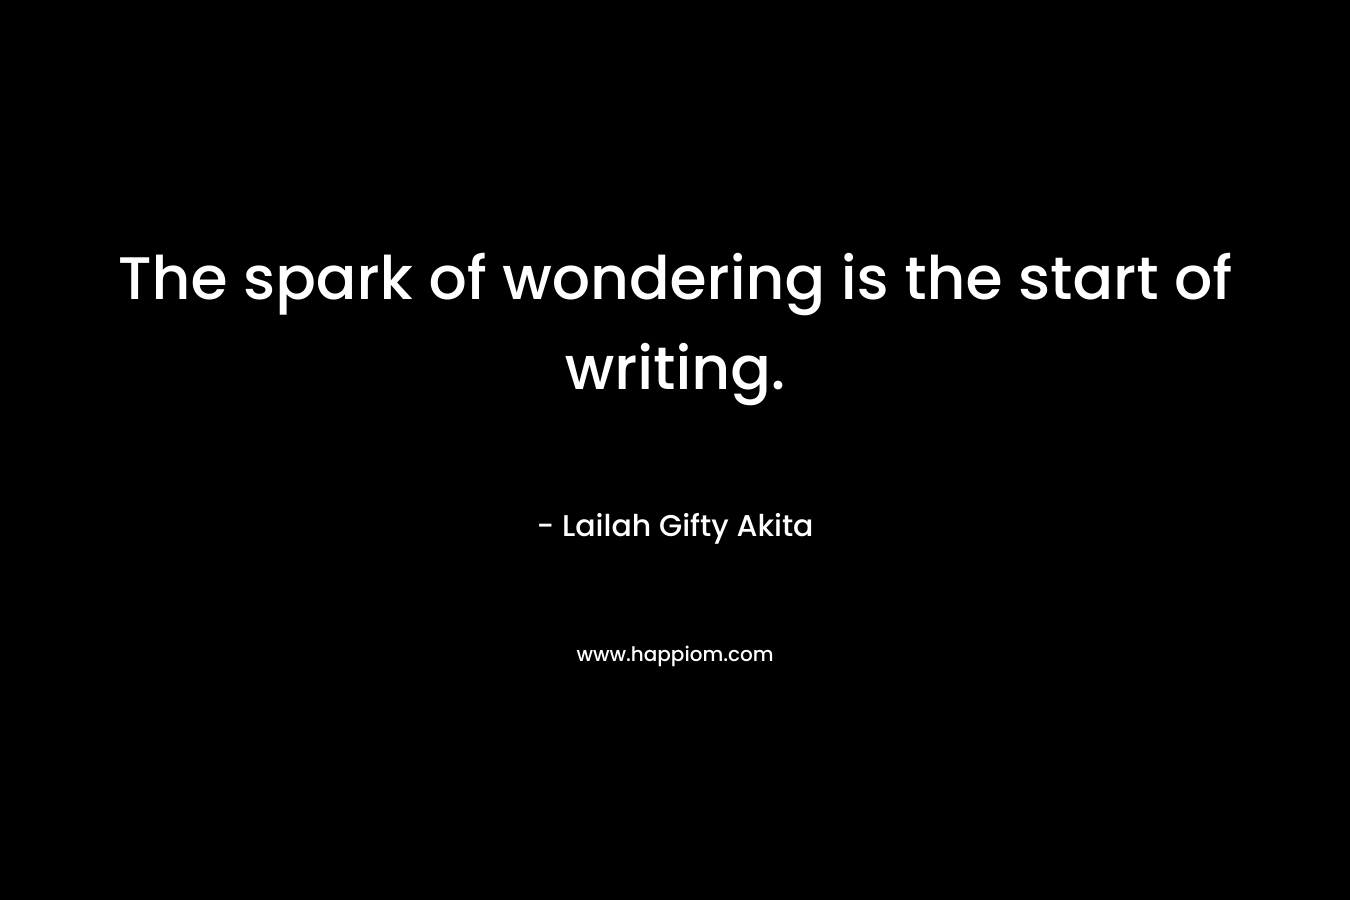 The spark of wondering is the start of writing.